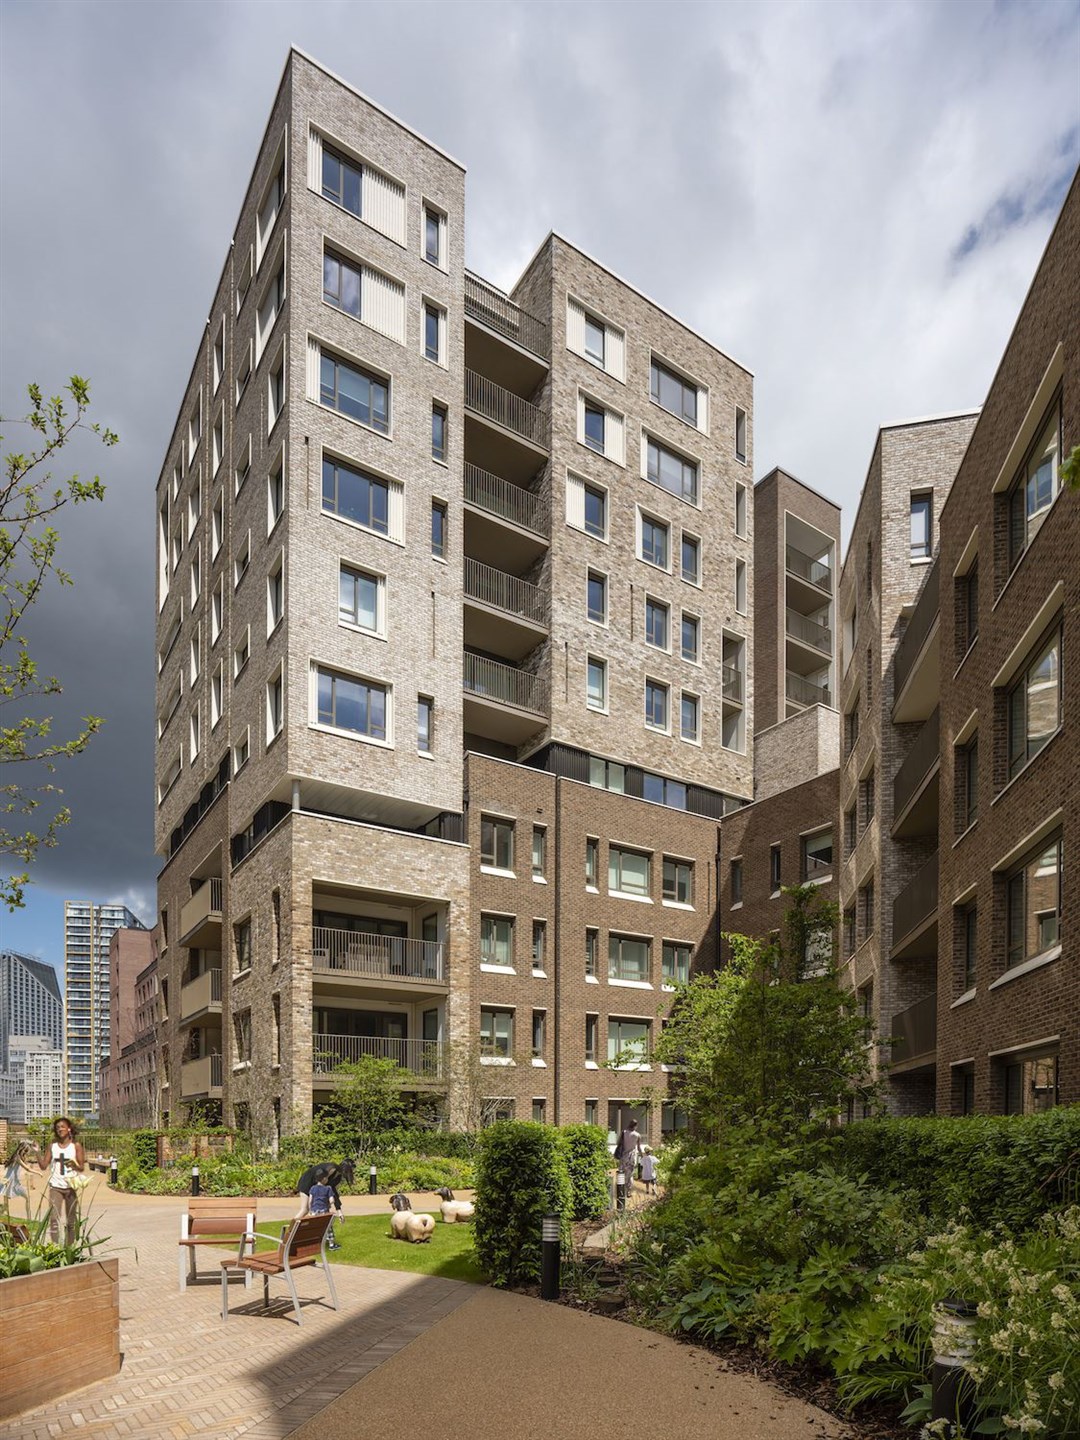 Orchard Gardens, Elephant Park, which forms part of Elephant and Castle’s regeneration programme in London (Timothy Soar/PA)